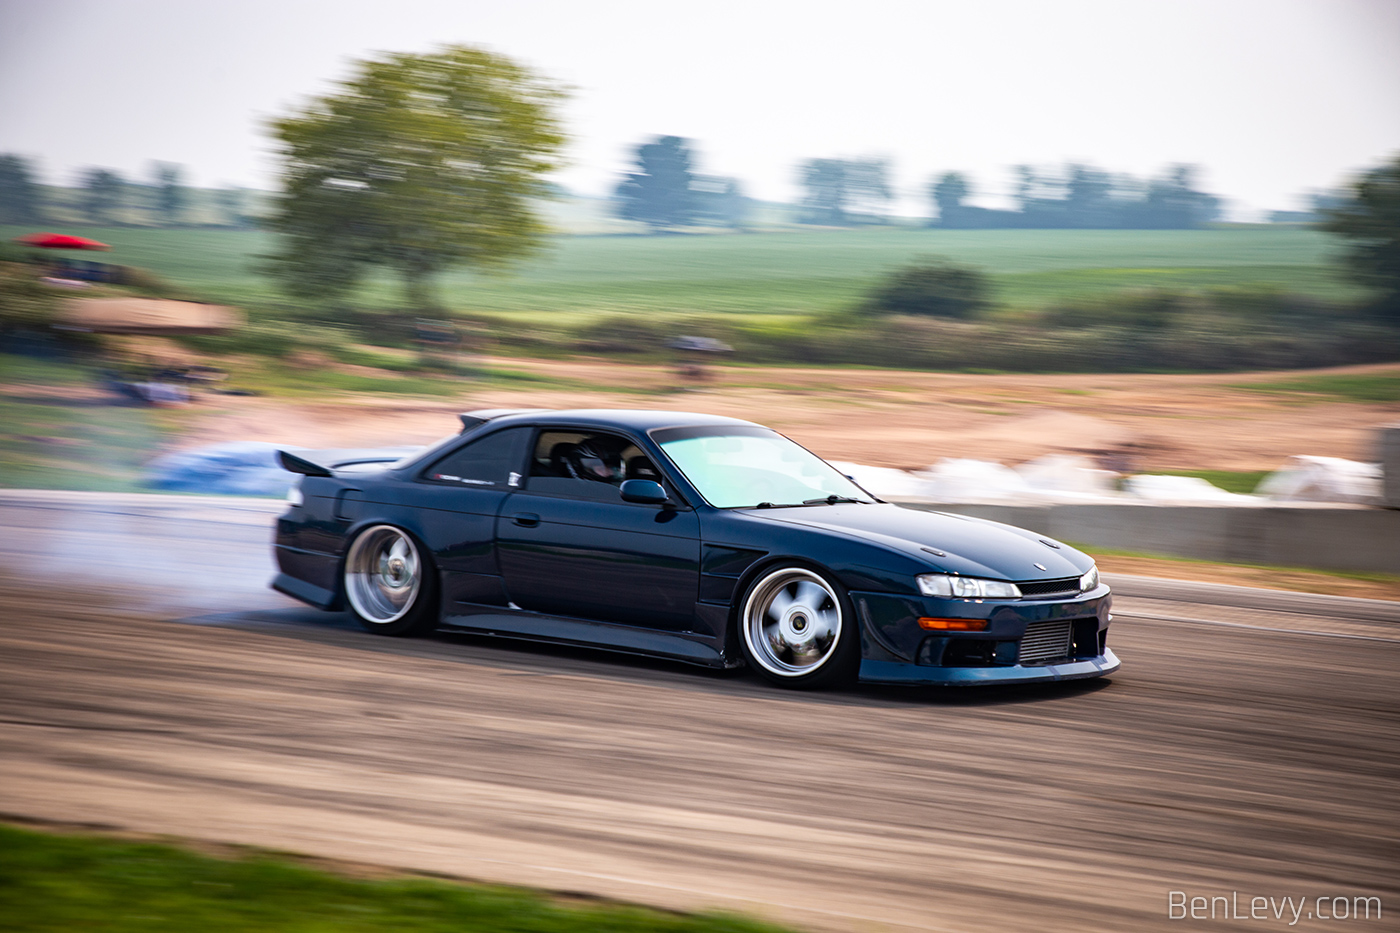 S14 Nissan with Polished Wheels Drifting